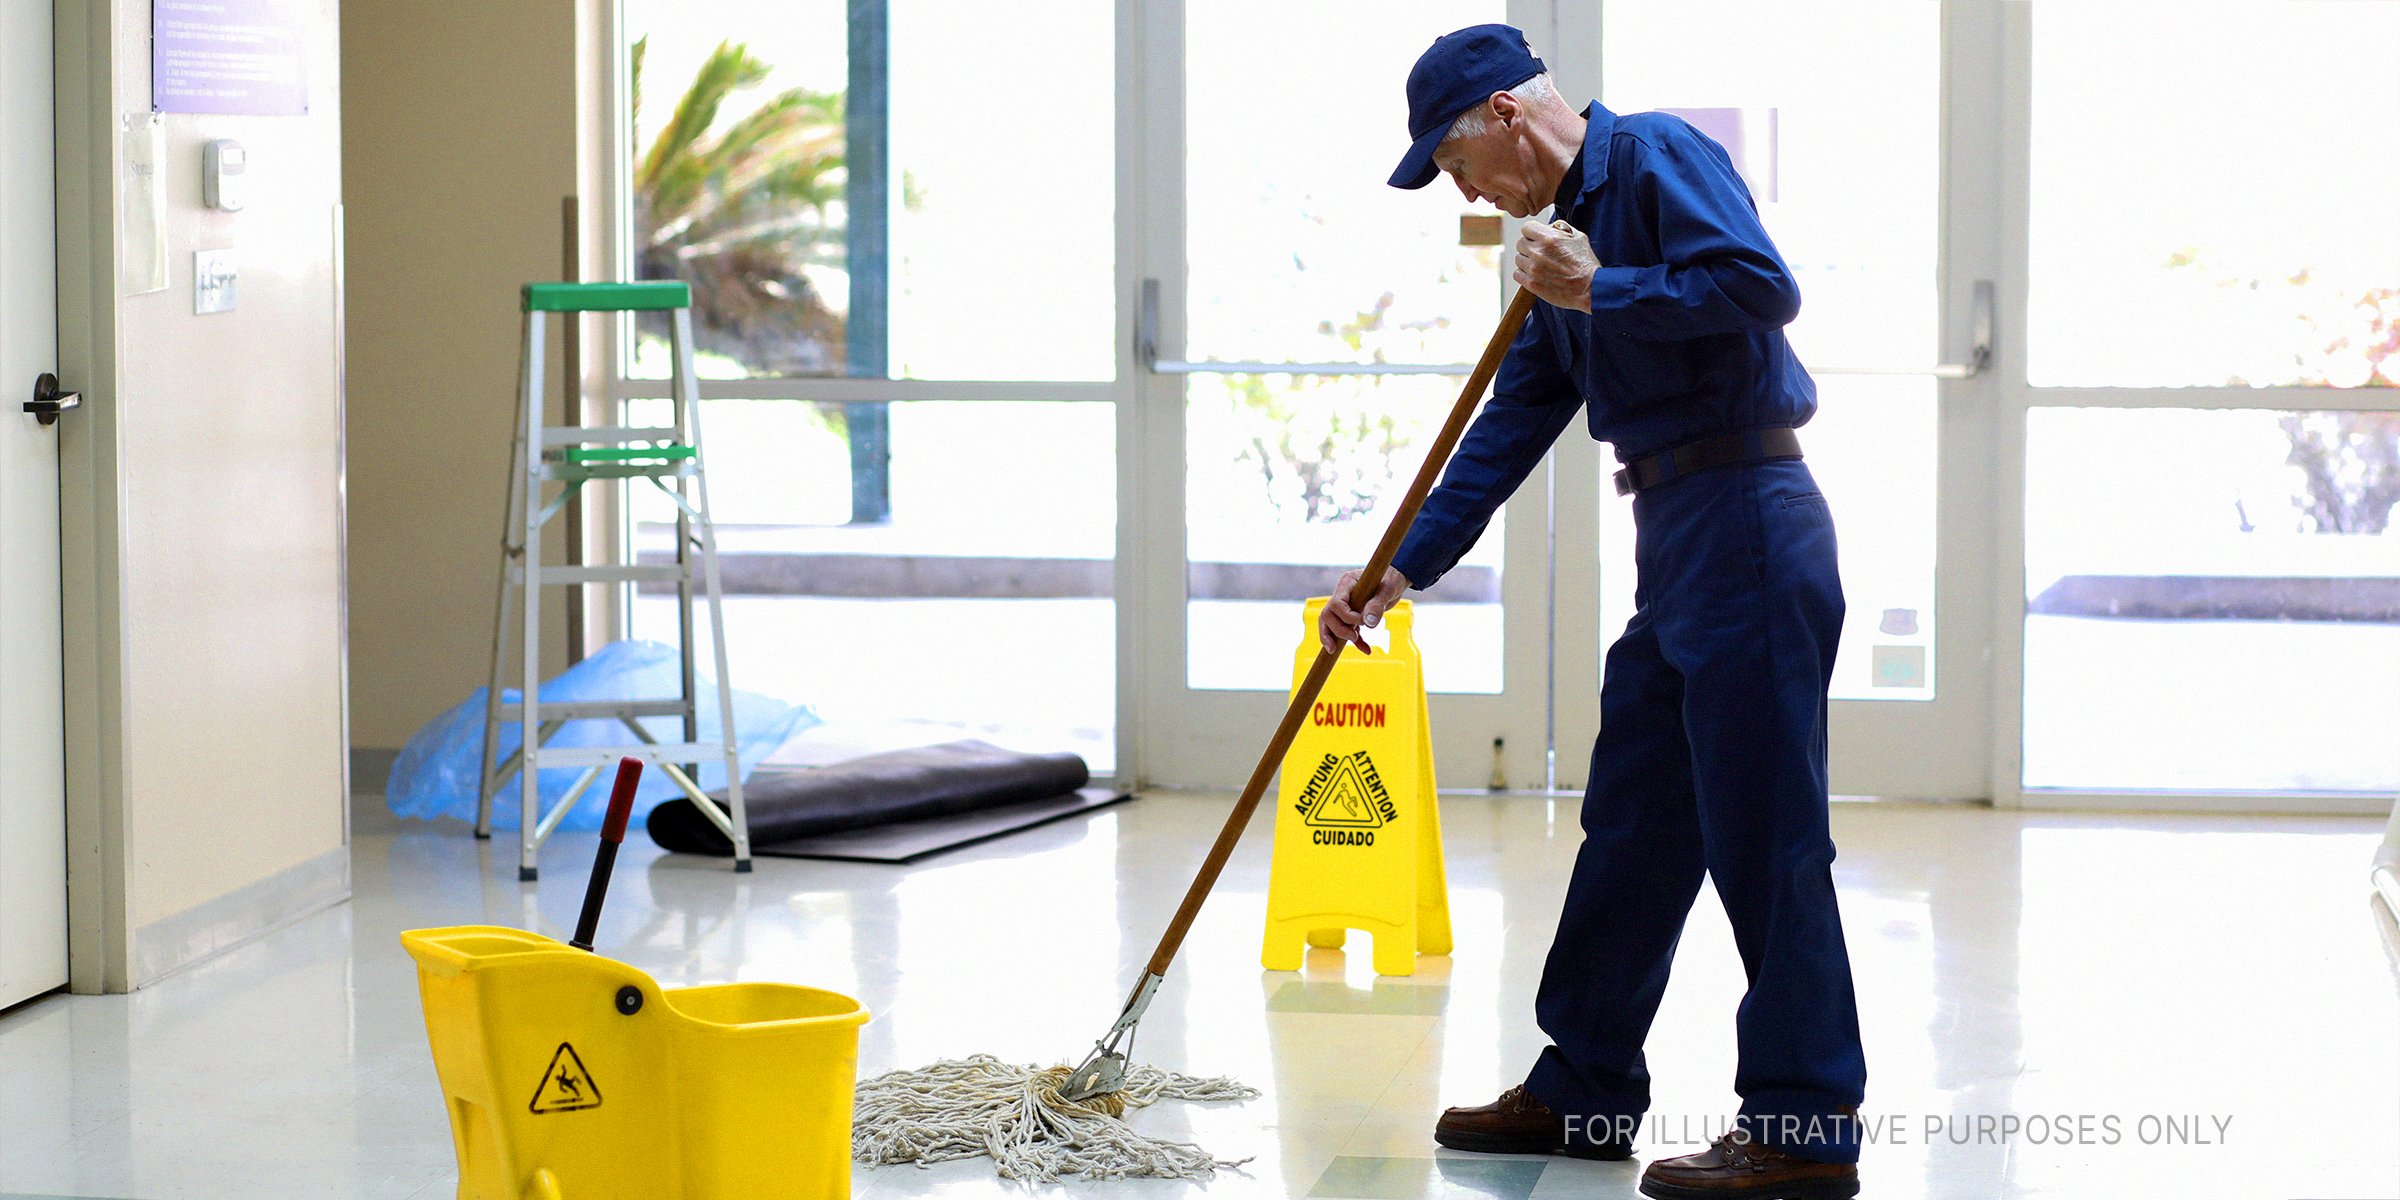 Janitor cleaning the floors | Source: Getty Images